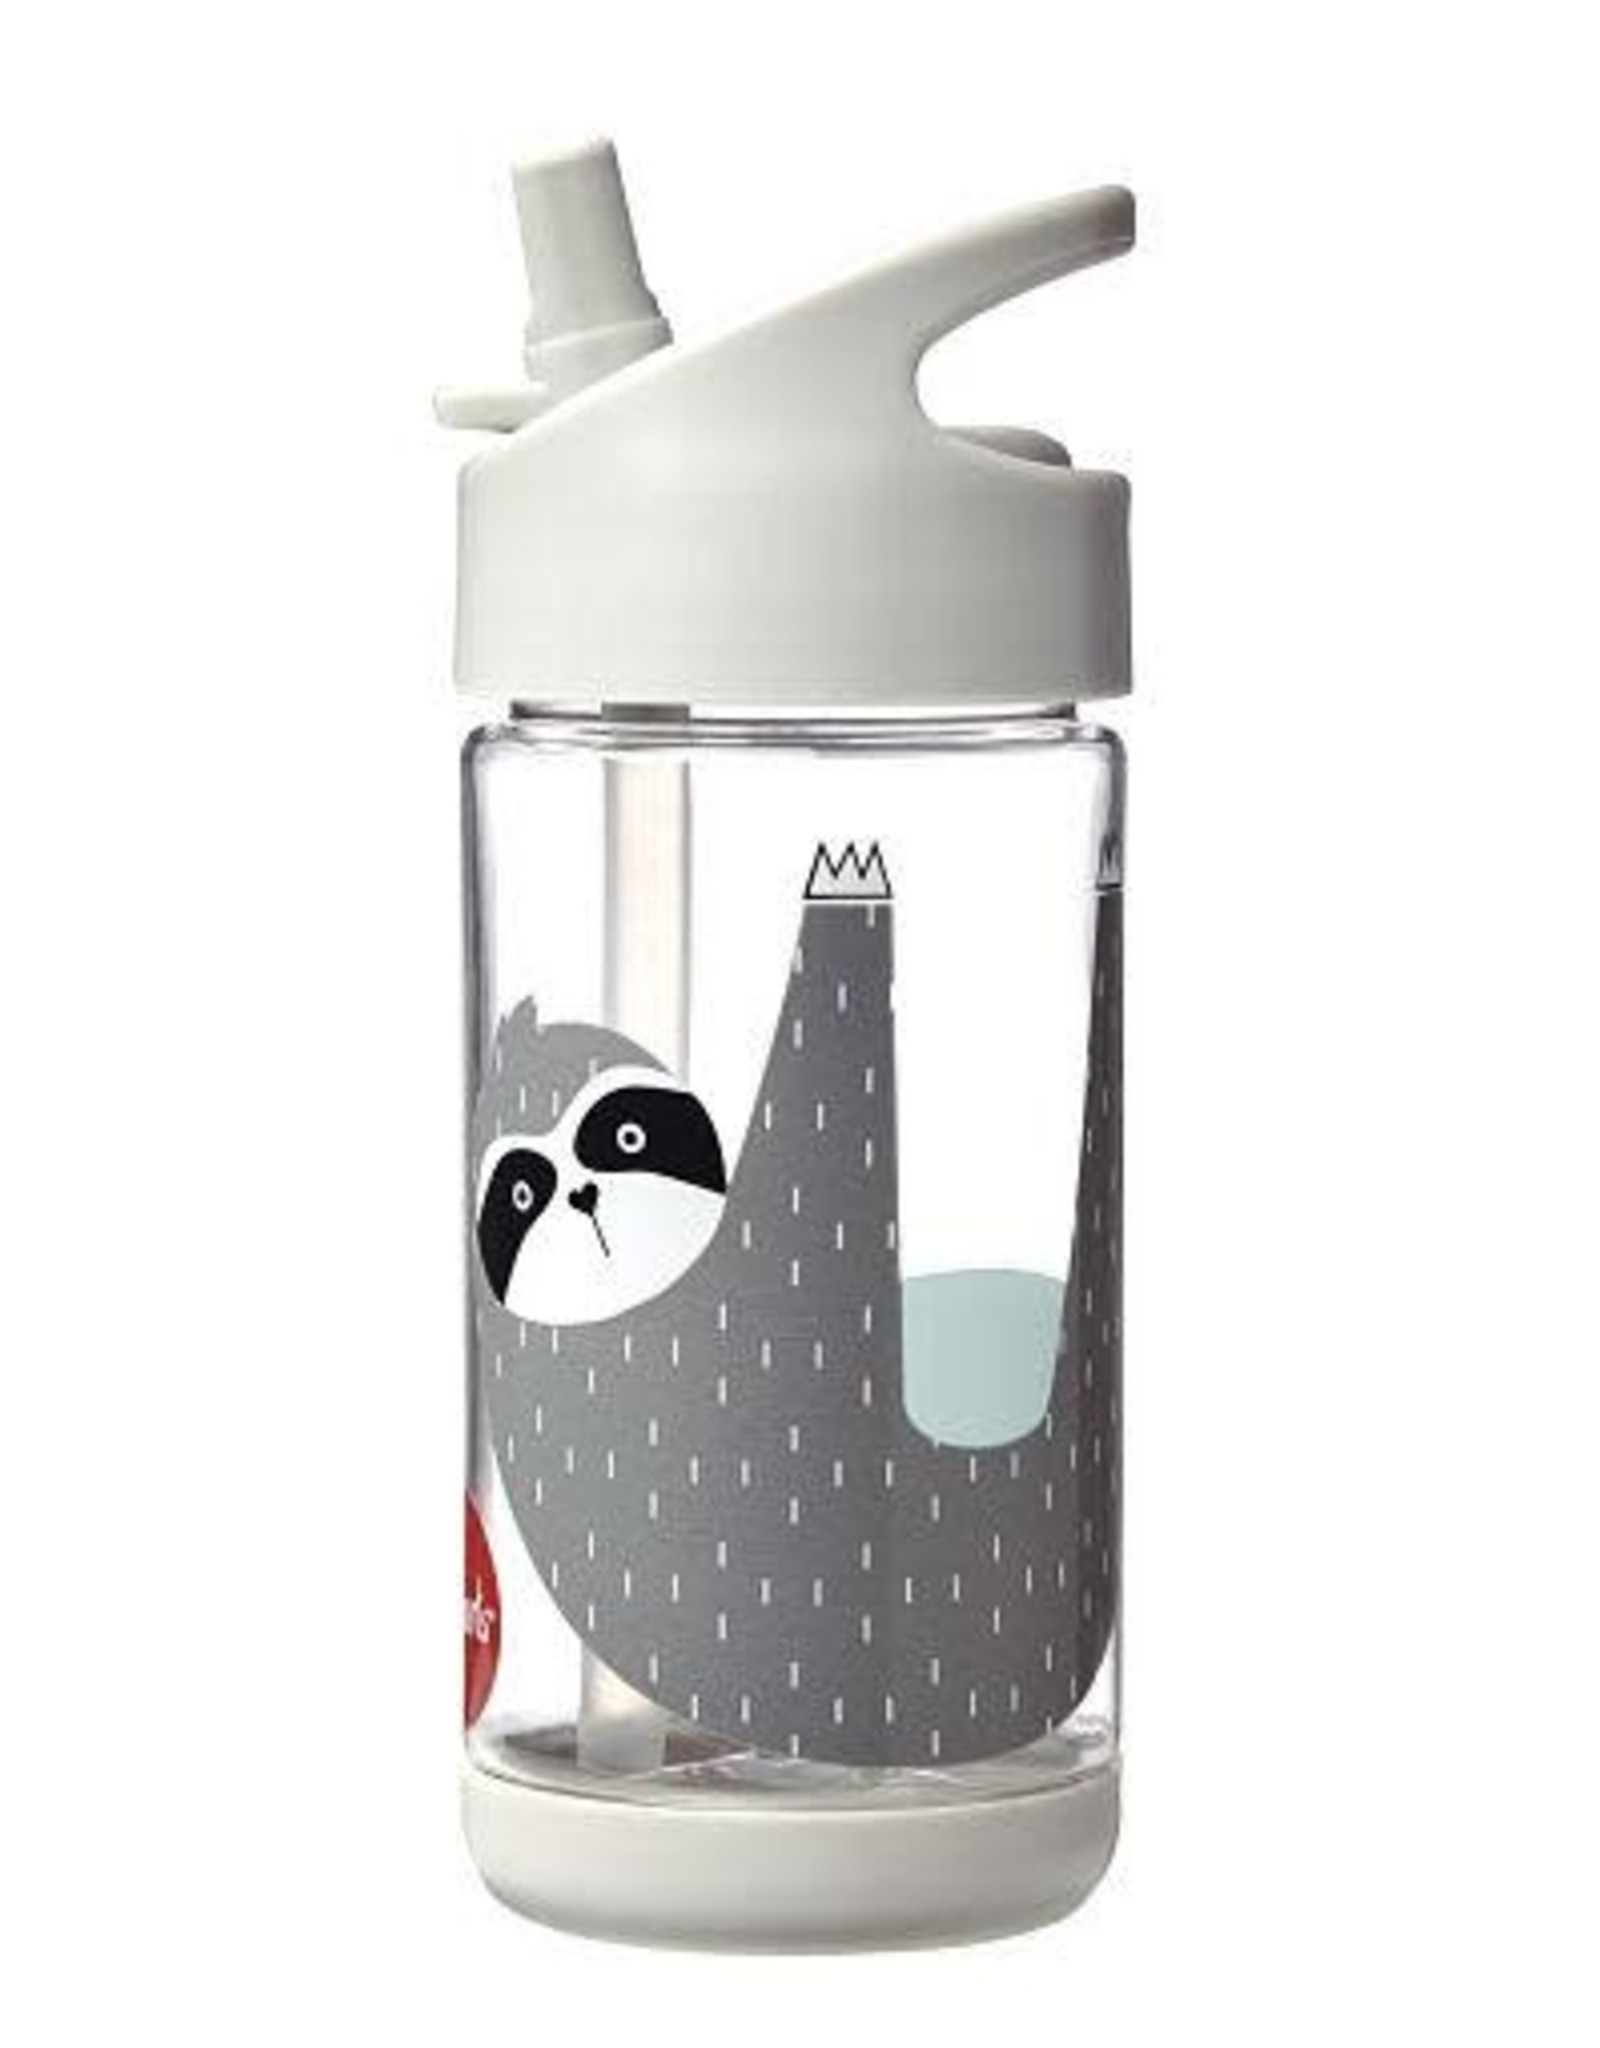 3 Sprouts Water Bottle Gray Sloth